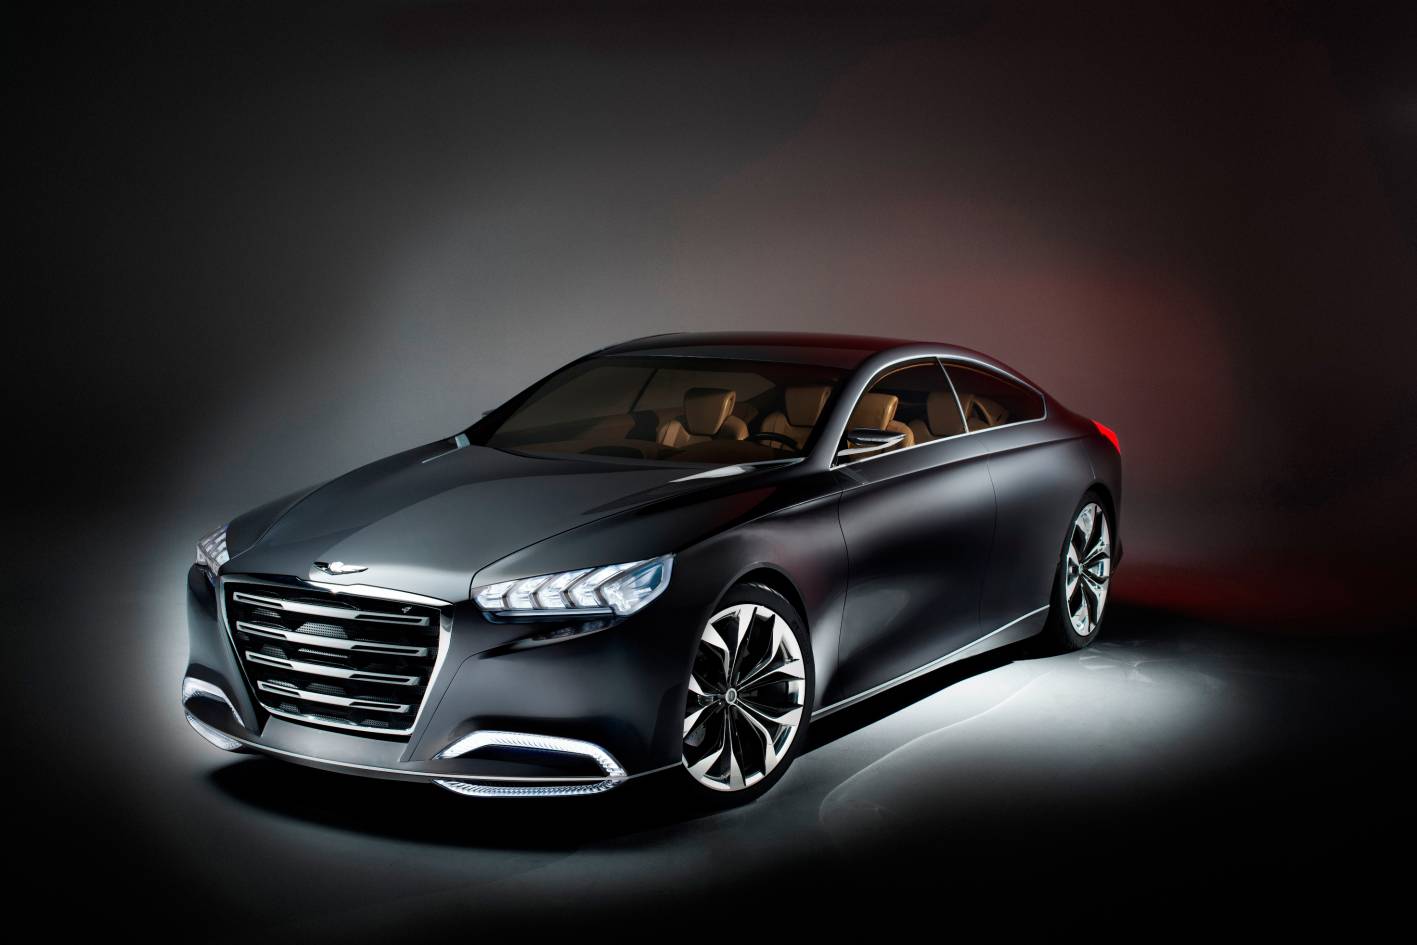 Next Hyundai Genesis to be first model to feature ‘HTRAC’ AWD